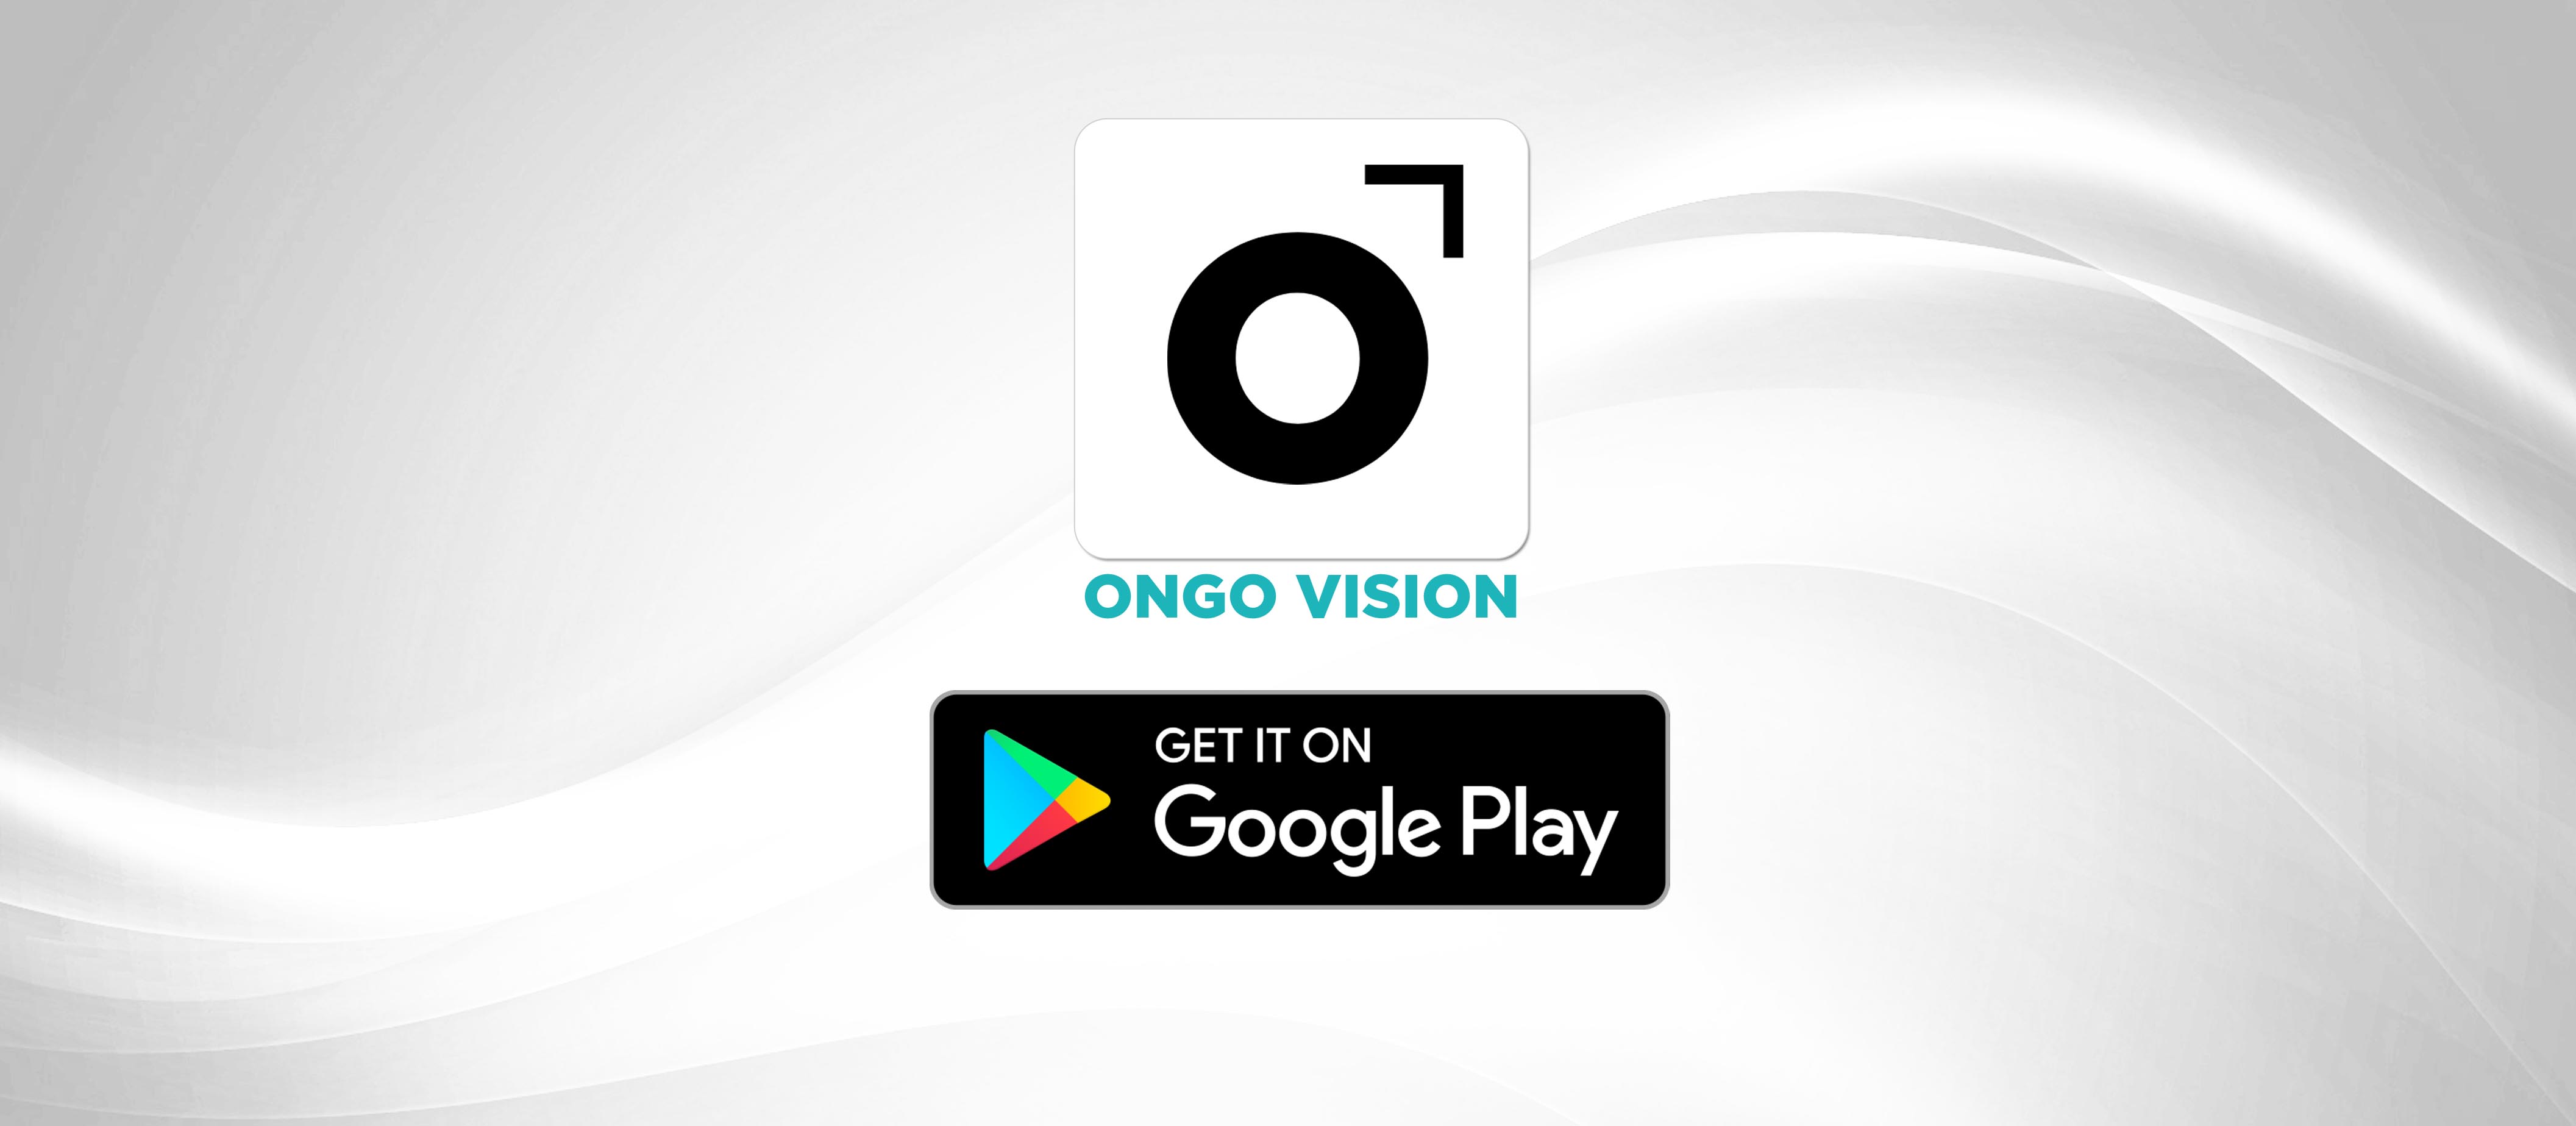 ONGO VISION android app from www.ongovettech.com